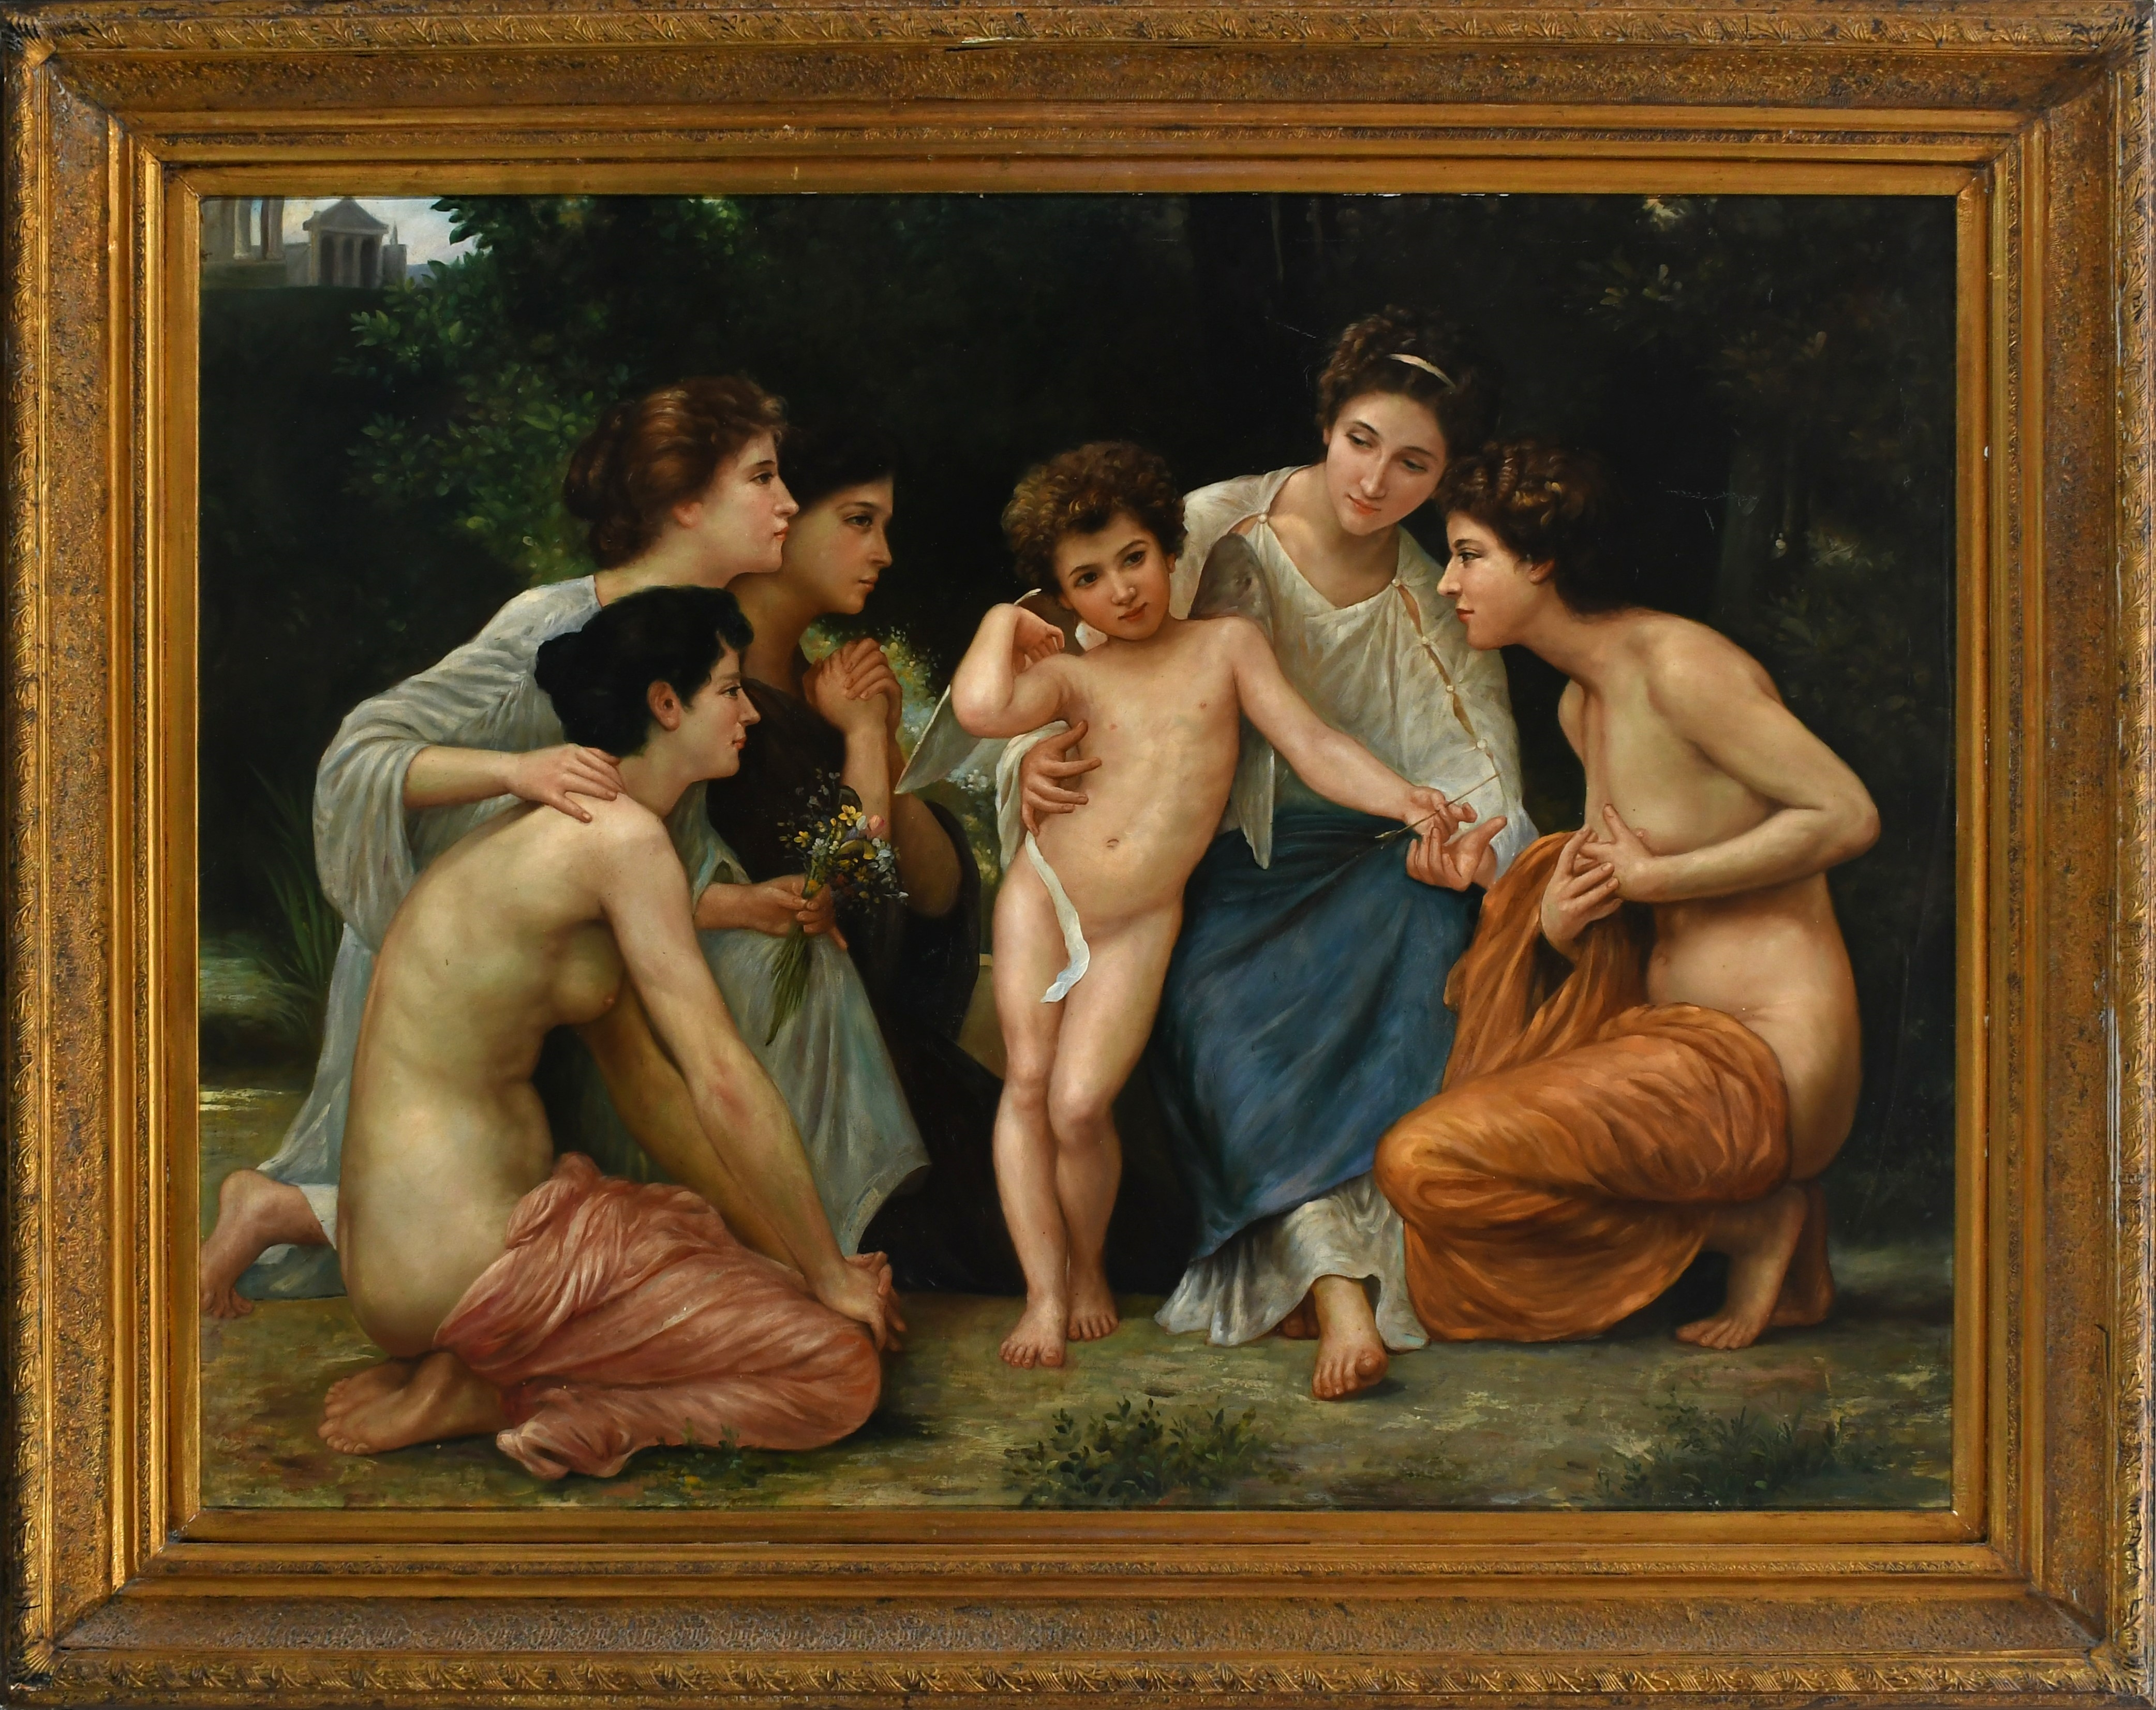 Artwork by William Adolphe Bouguereau, L'admiration, Made of Oil on canvas